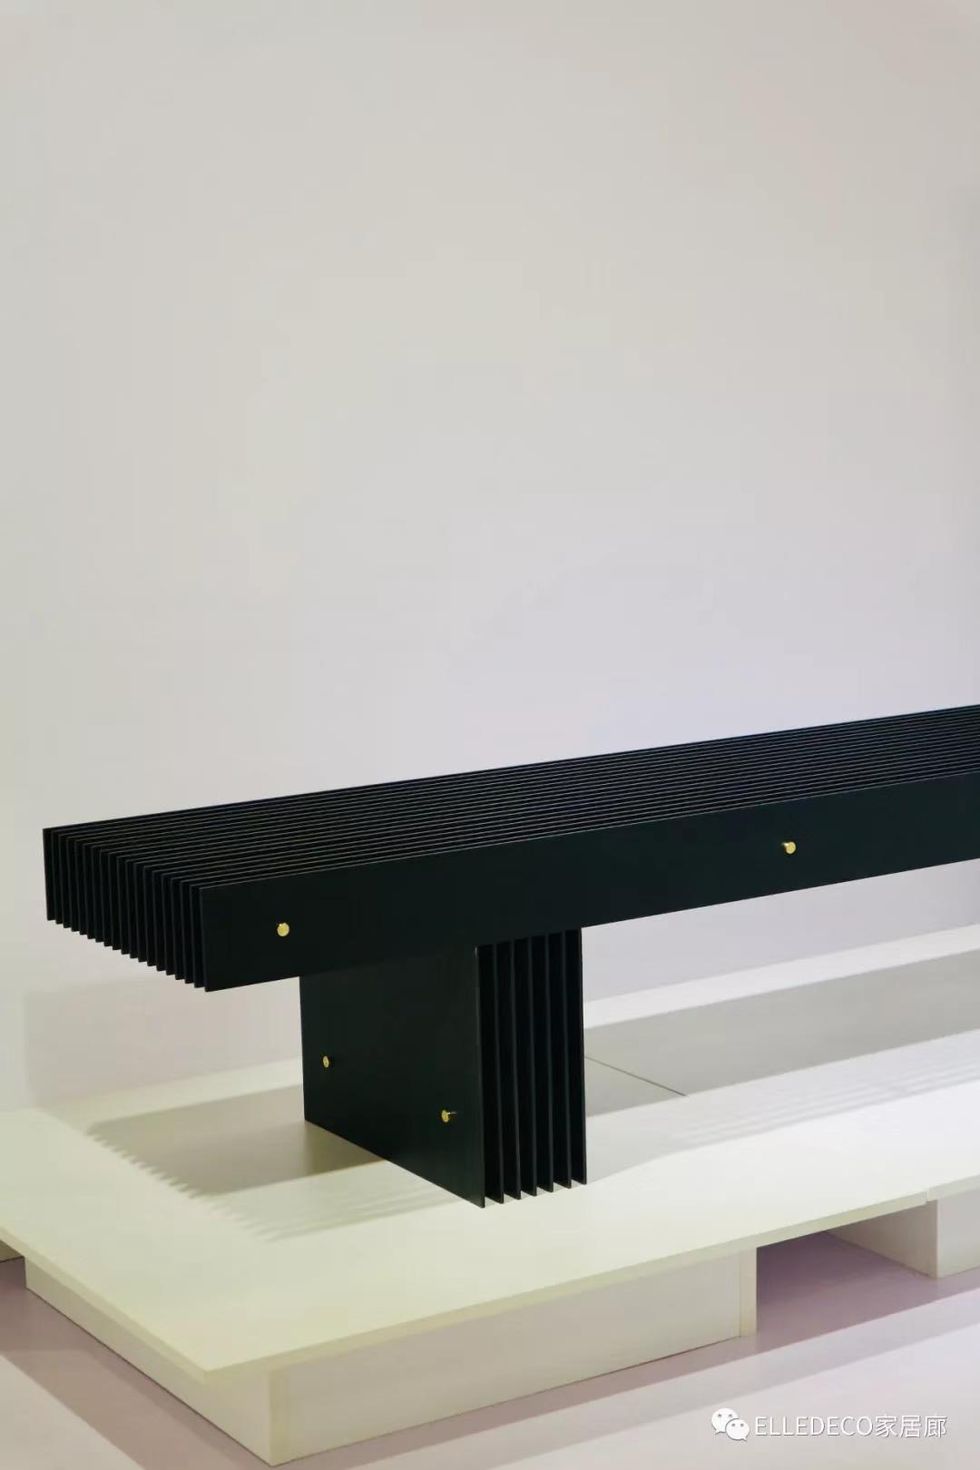 Table, Furniture, Architecture, Coffee table, Rectangle, 